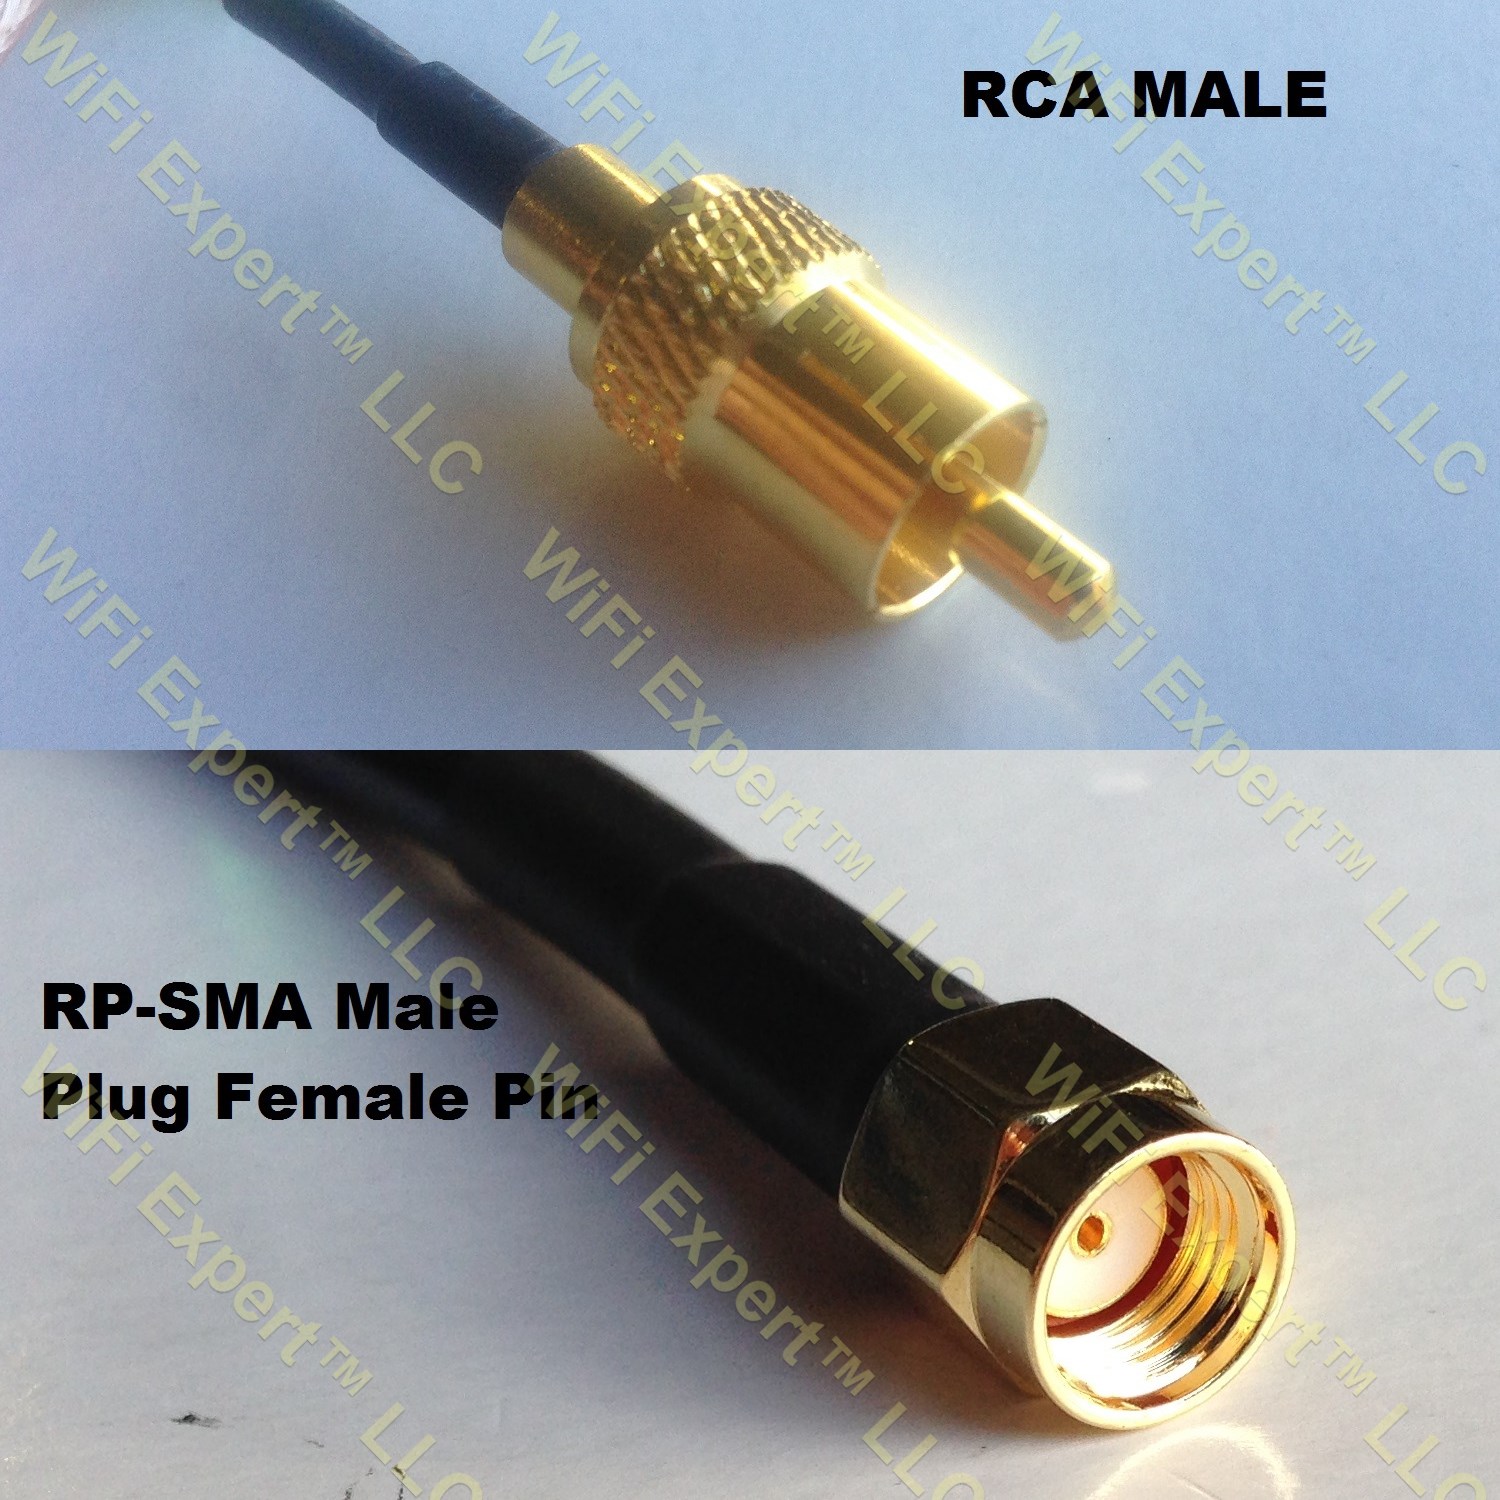 USA-CA RG58 BNC FEMALE to SMA MALE ANGLE Coaxial RF Pigtail Cable 